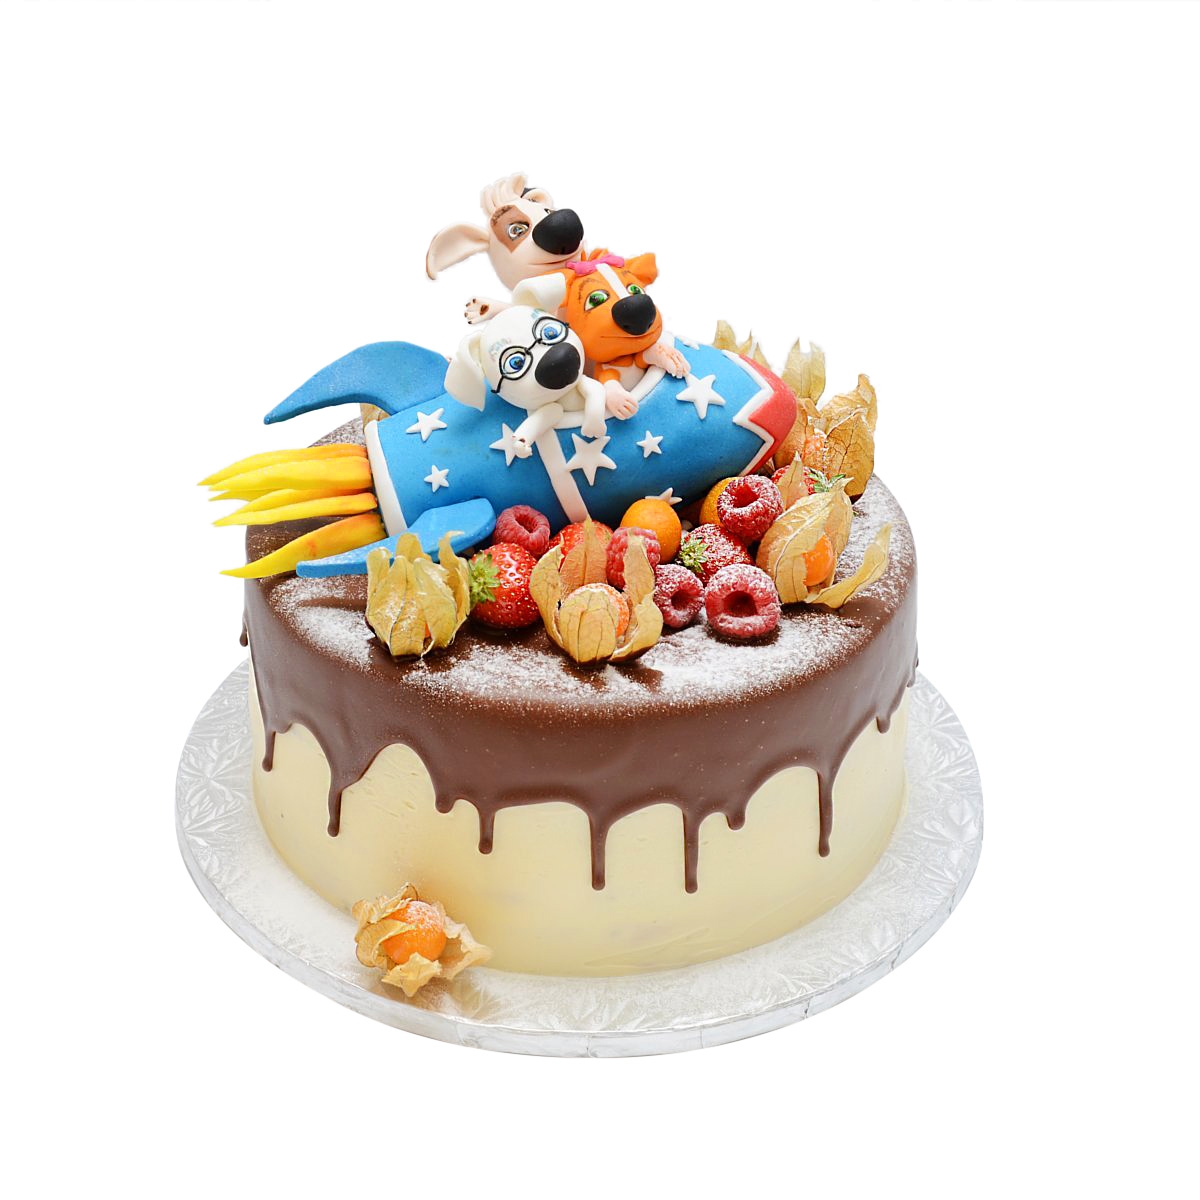 Product Cake to order - Fantasy